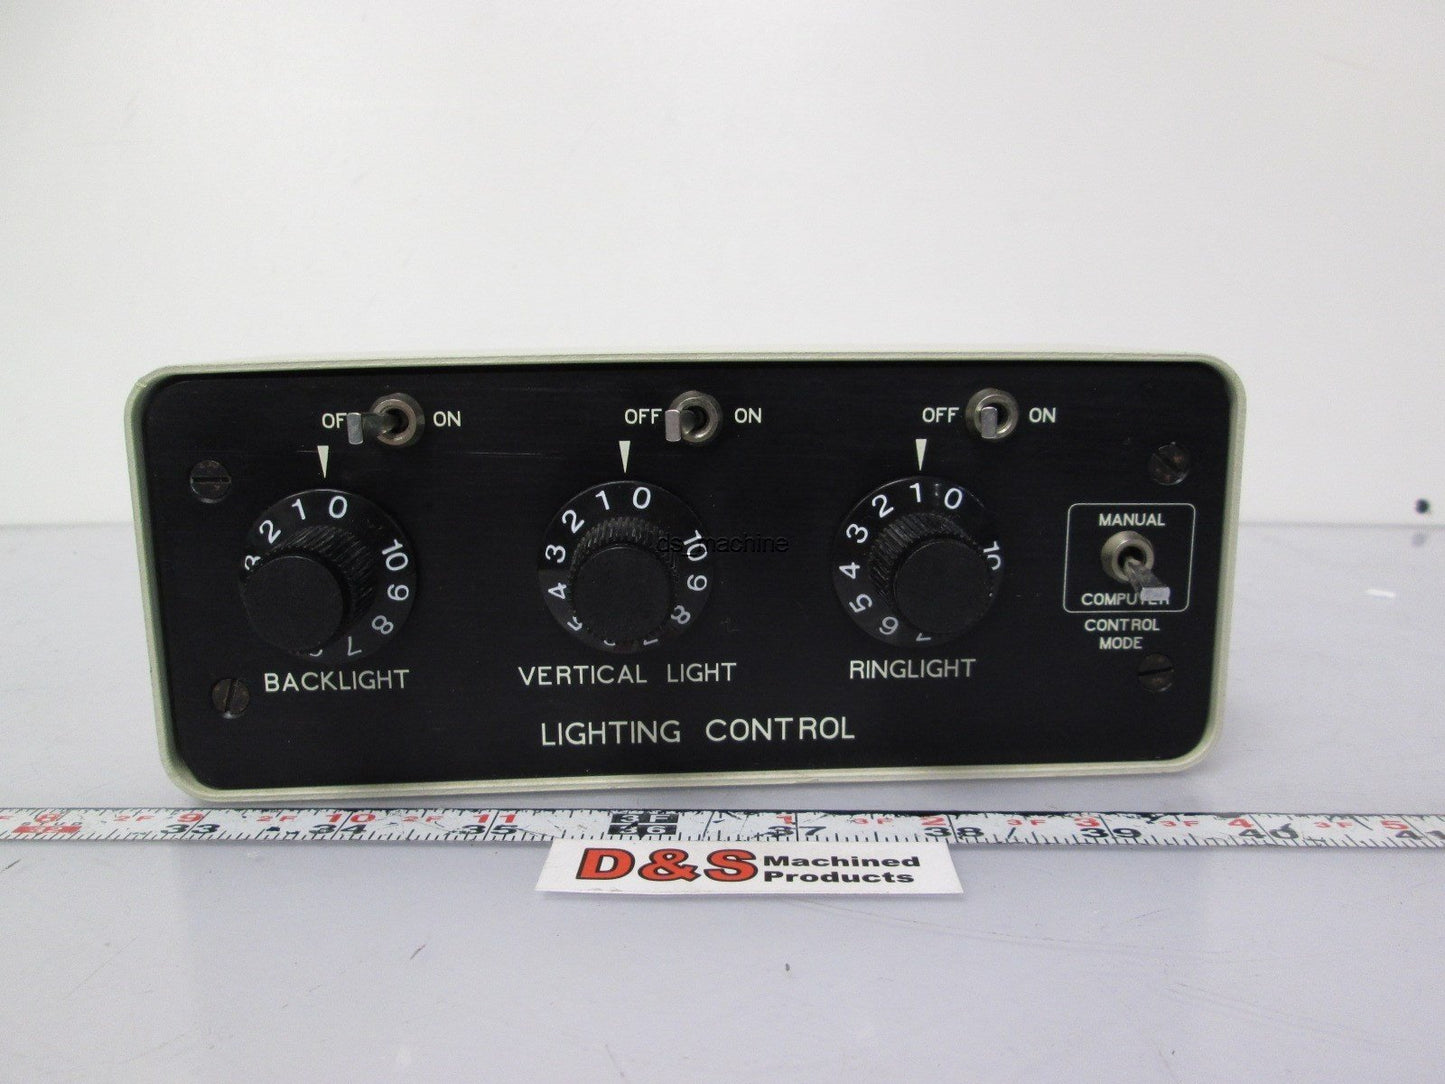 Used Light Control Box 010-2354-001 for Microscope or Machine Vision 3 Channel Remote